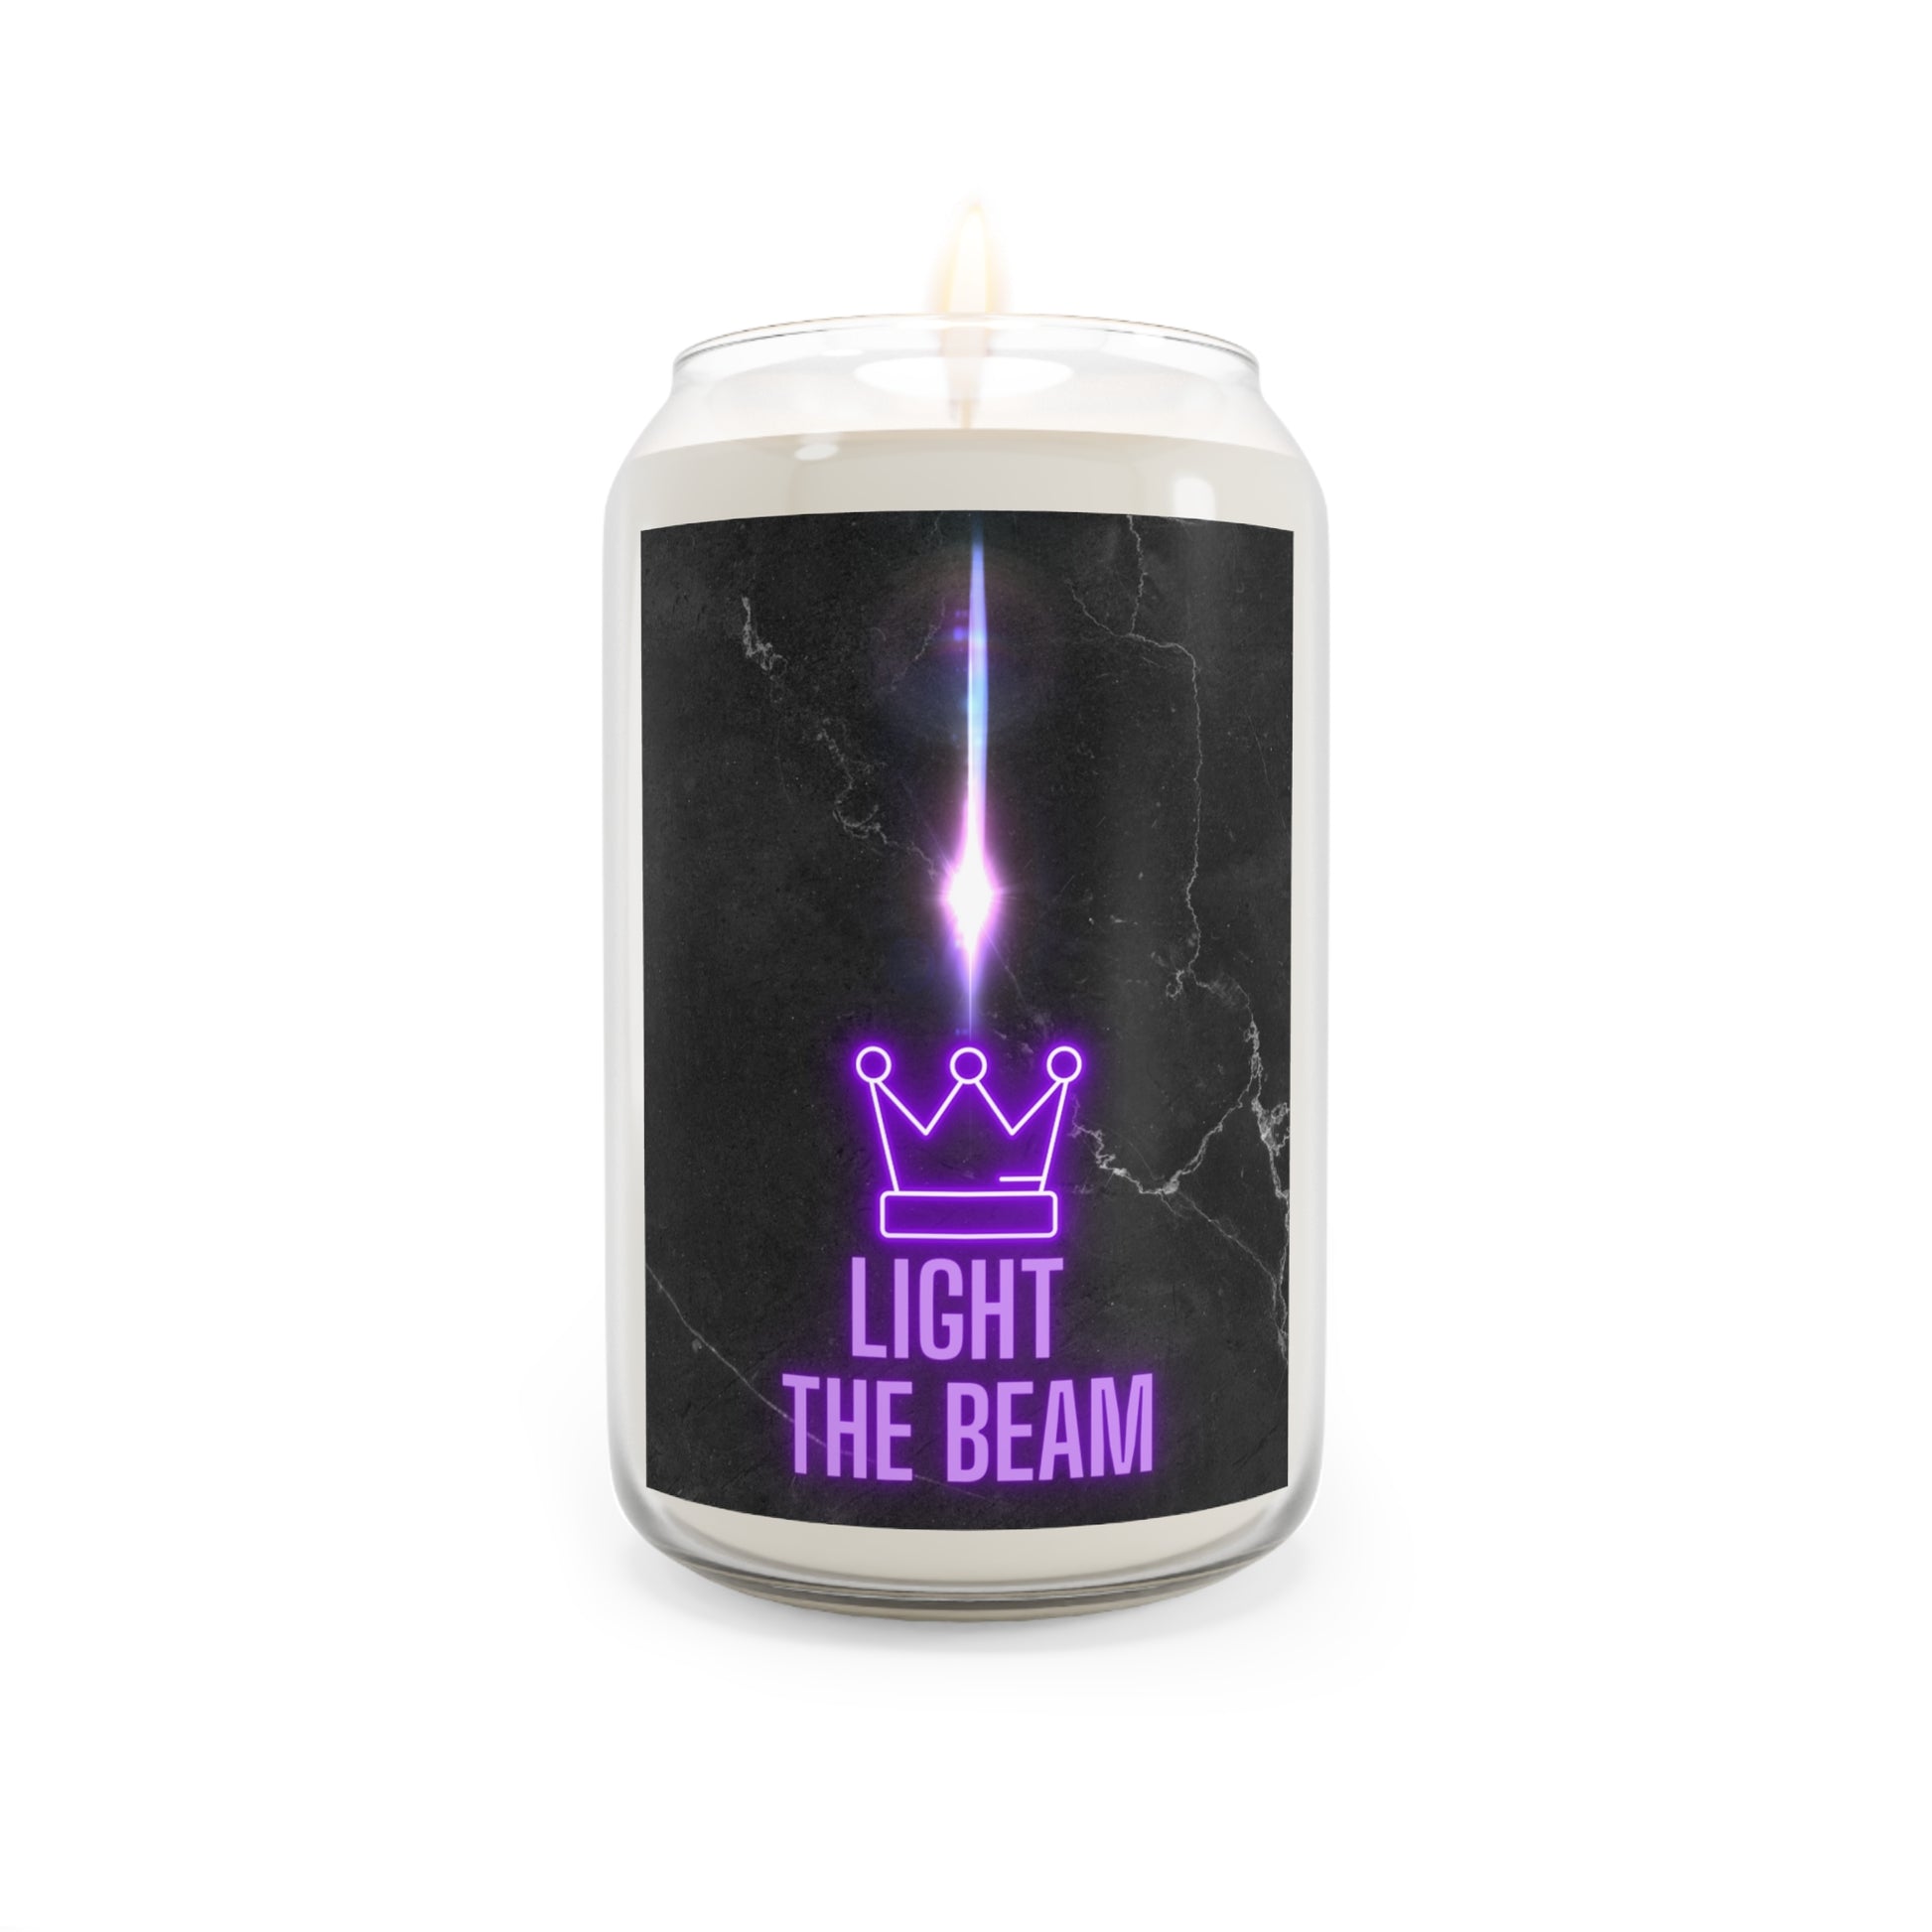 Light the Beam Sacramento Basketball Scented Glass Beer Can Candle.Light the Beam, Beam Town! Celebrate another W - WIN - for your Kings Basketball team and light the beam at home with this scented 13.75 oz candle. Use this beer can shaped glass candle holder to celebrate another Kings win and light your beam! Gift for Sac Mom, Gift for Sac Dad, Gift for Sac College Student.